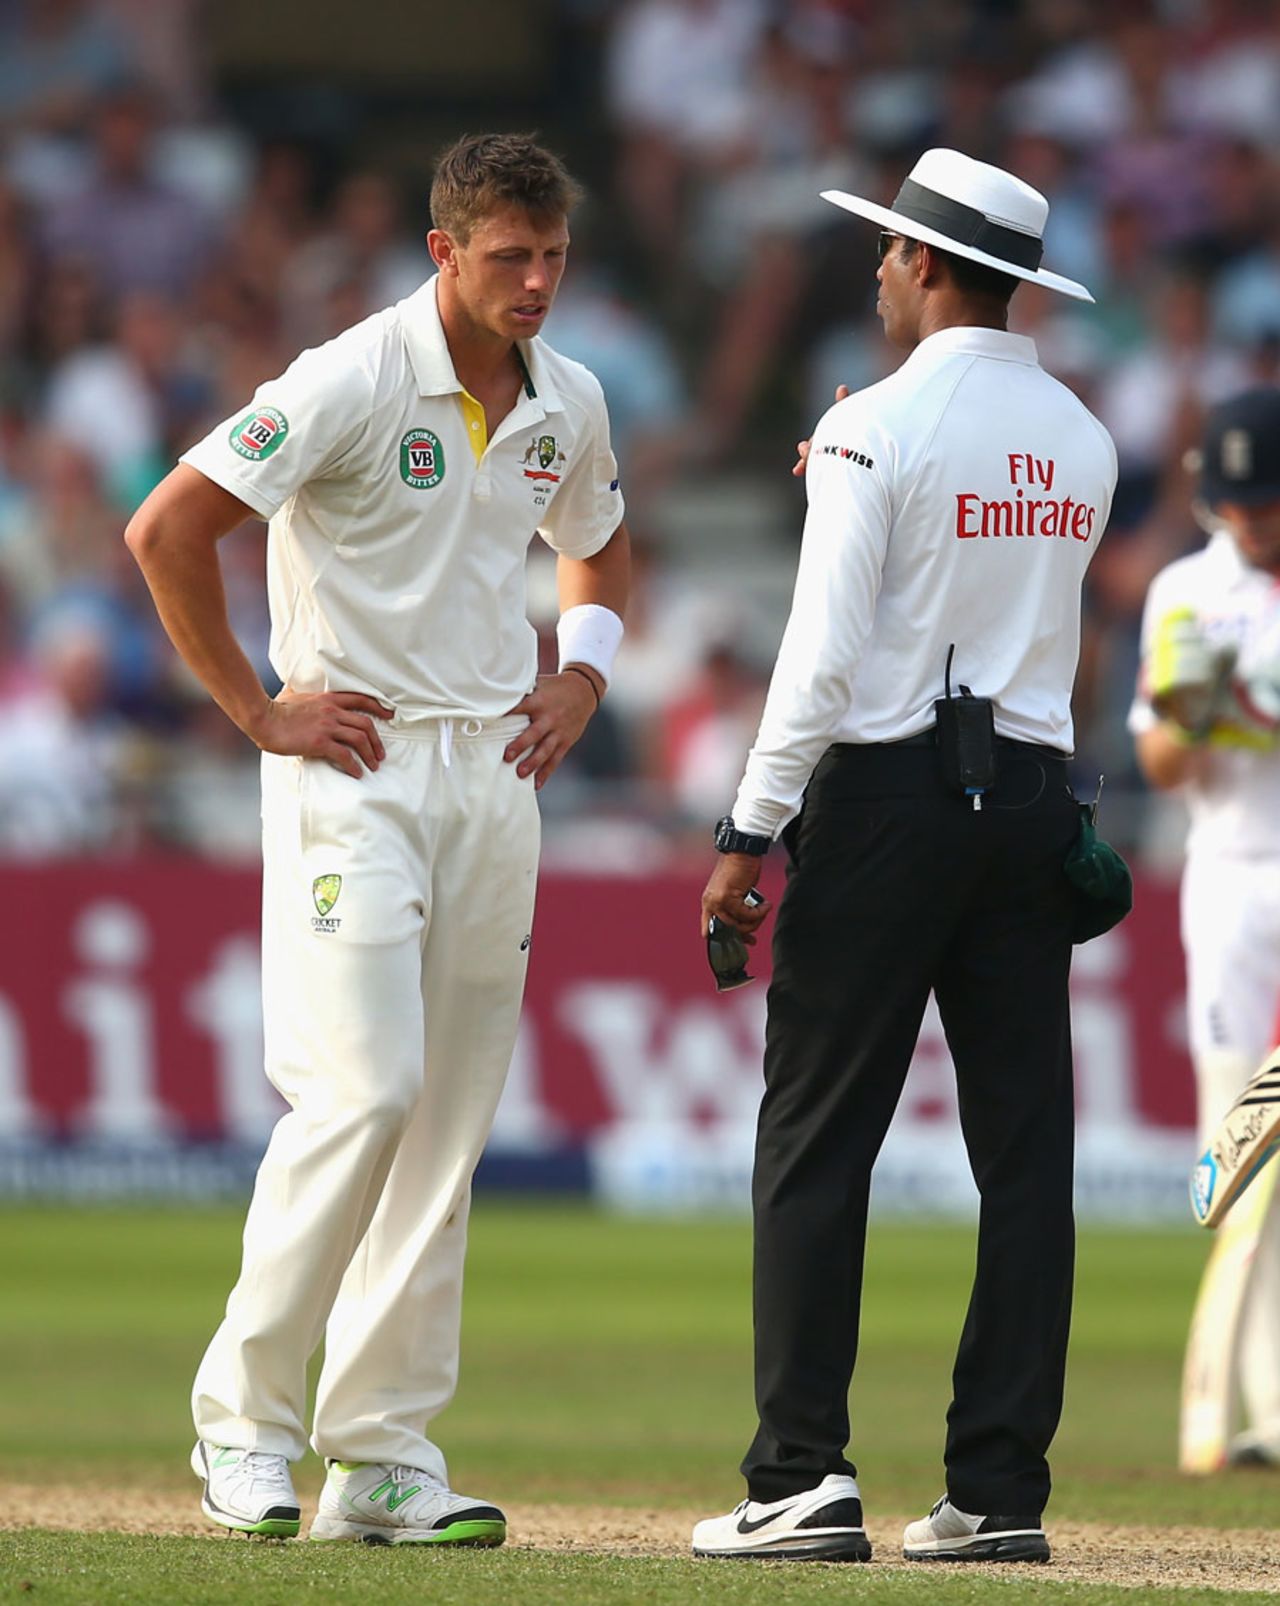 James Pattinson was told to calm down after an enthusiastic appeal, England v Australia, 1st Investec Test, Trent Bridge, 3rd day, July 12, 2013